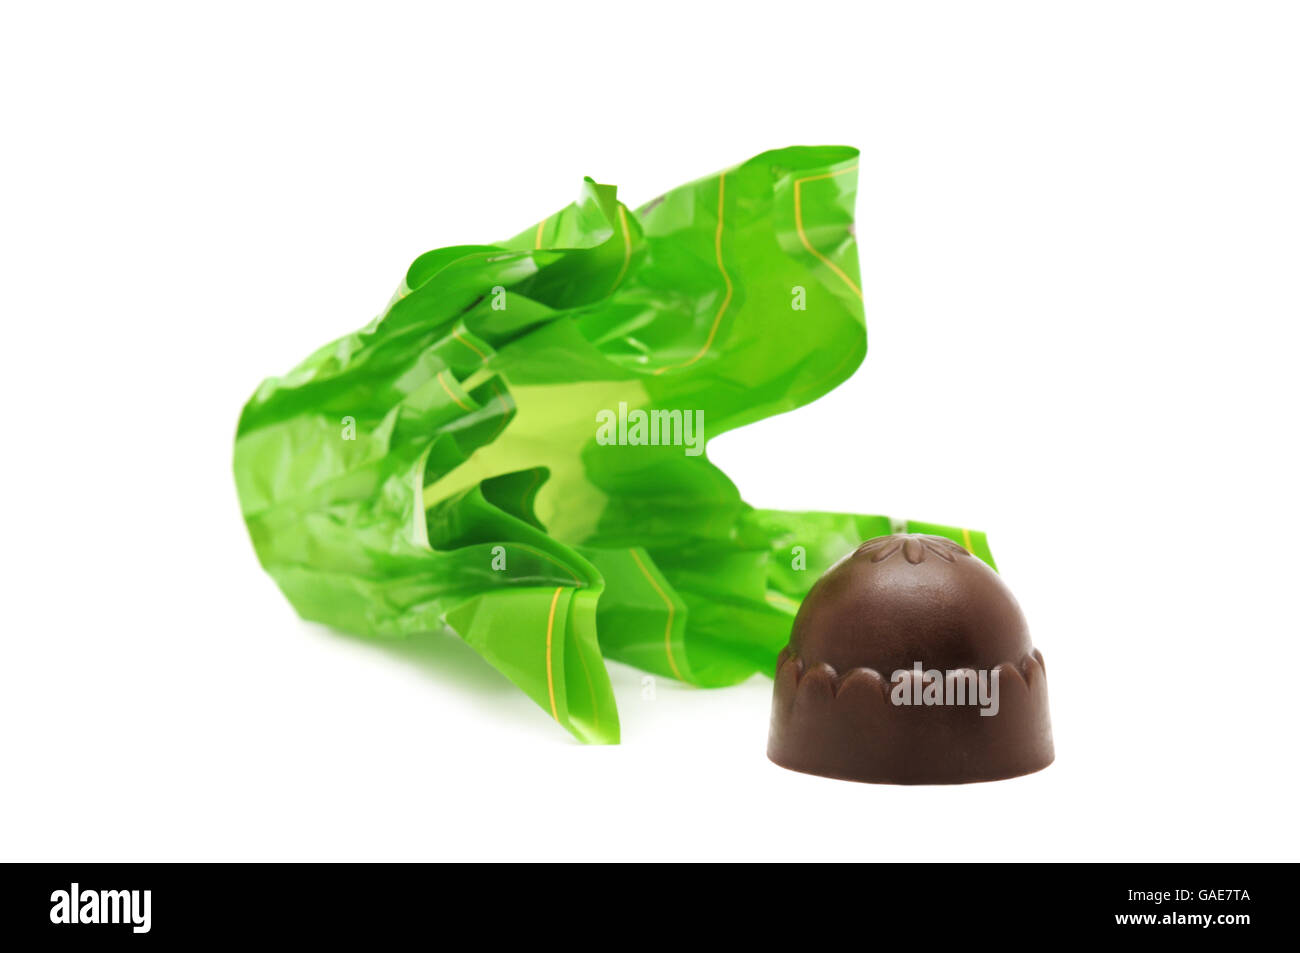 Chocolates and candy wrapper isolated on a white background Stock Photo